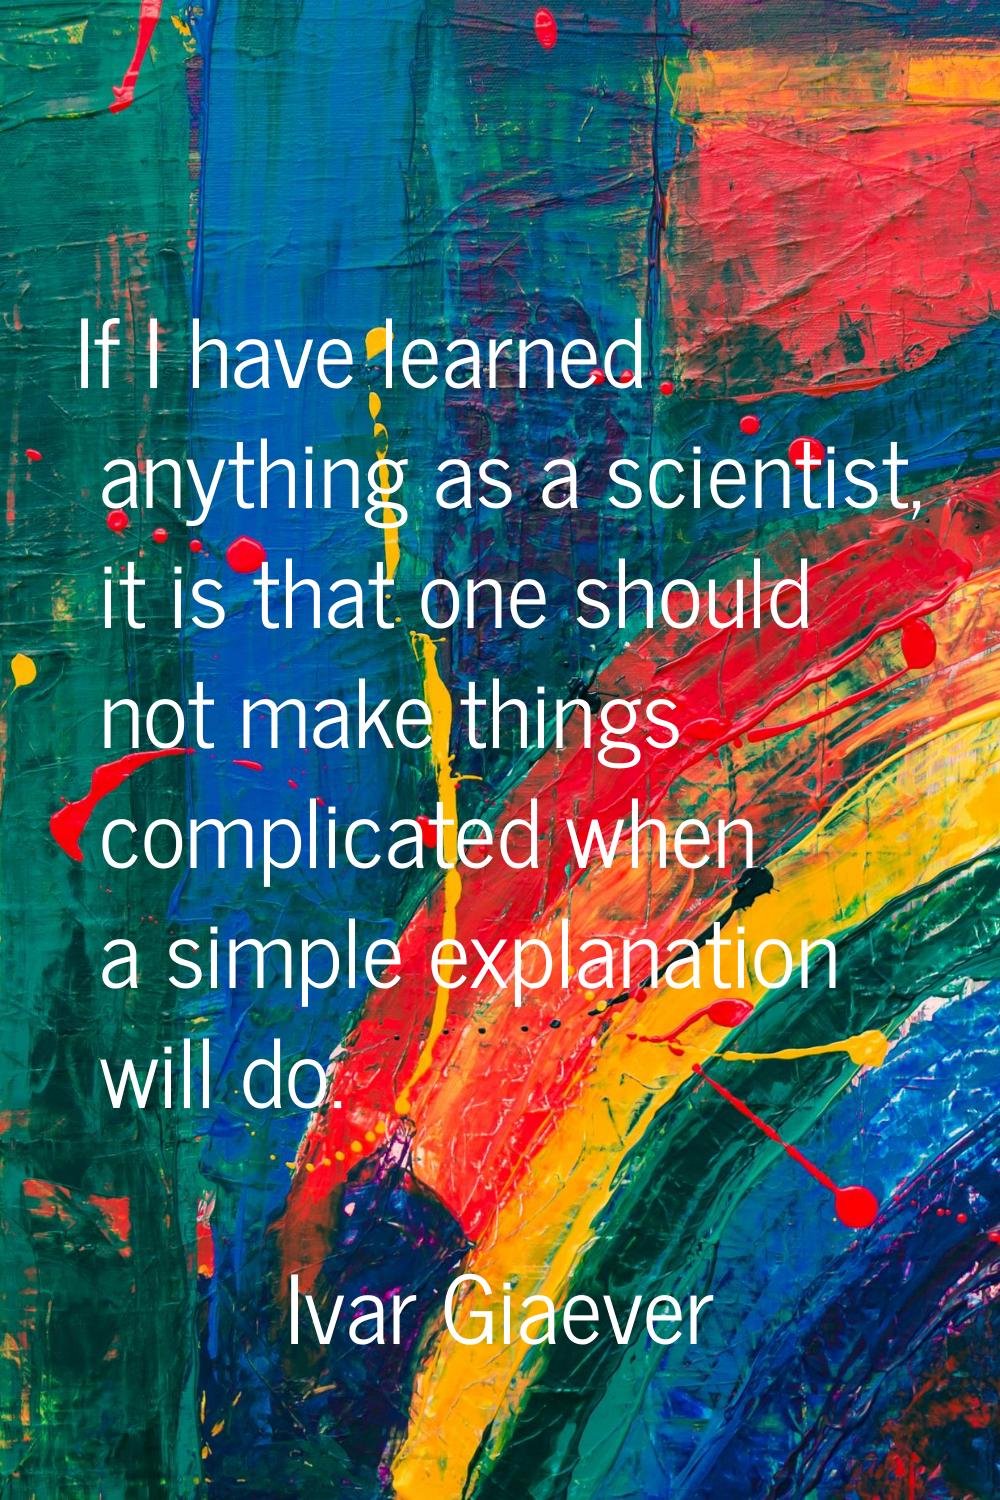 If I have learned anything as a scientist, it is that one should not make things complicated when a